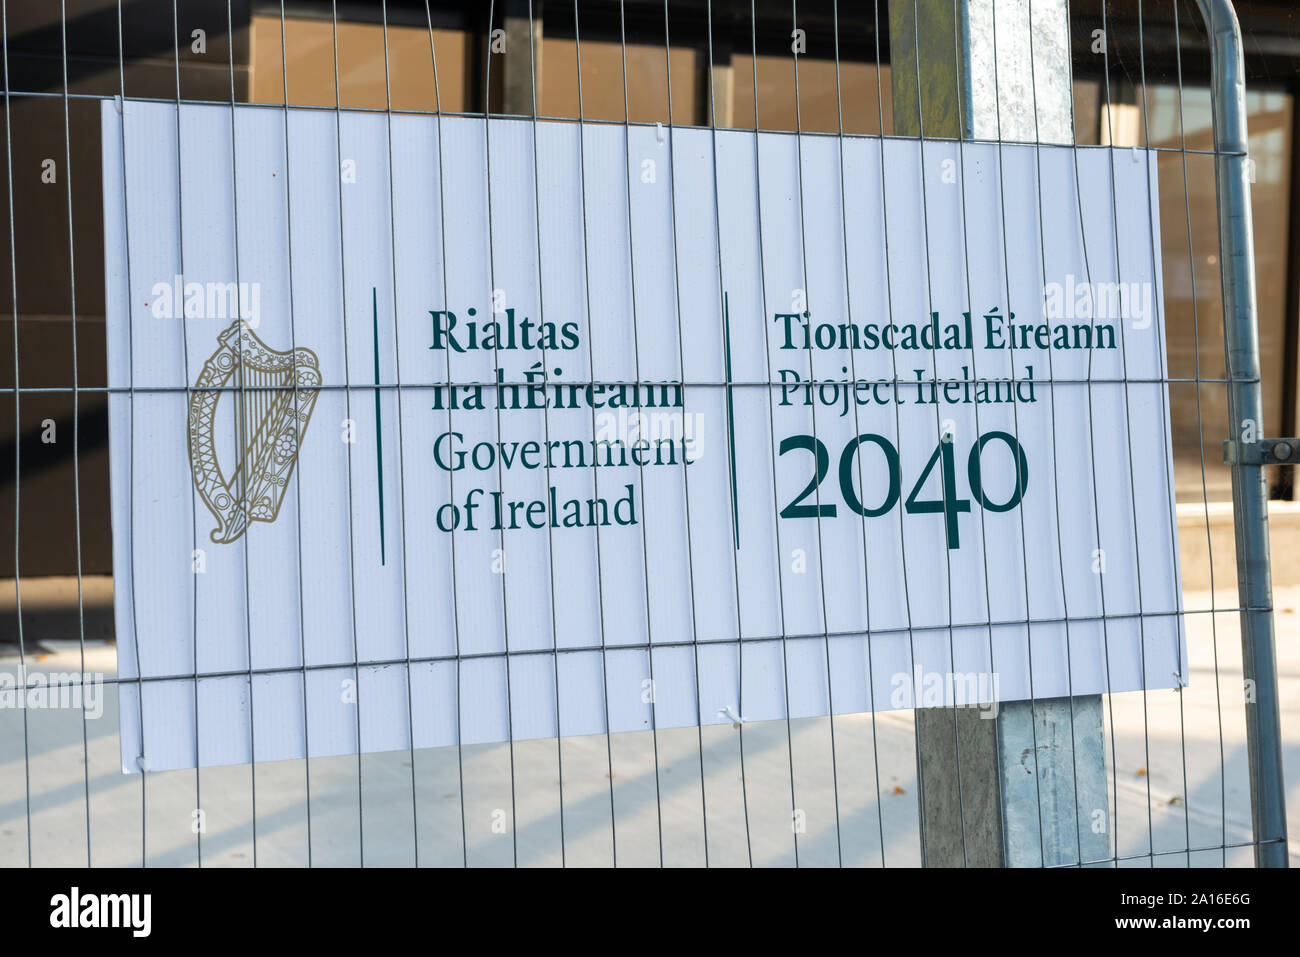 Project Ireland 2040 by the Irish Government bilingual Information sign on a fence at a construction site in Killarney, County Kerry, Ireland Stock Photo